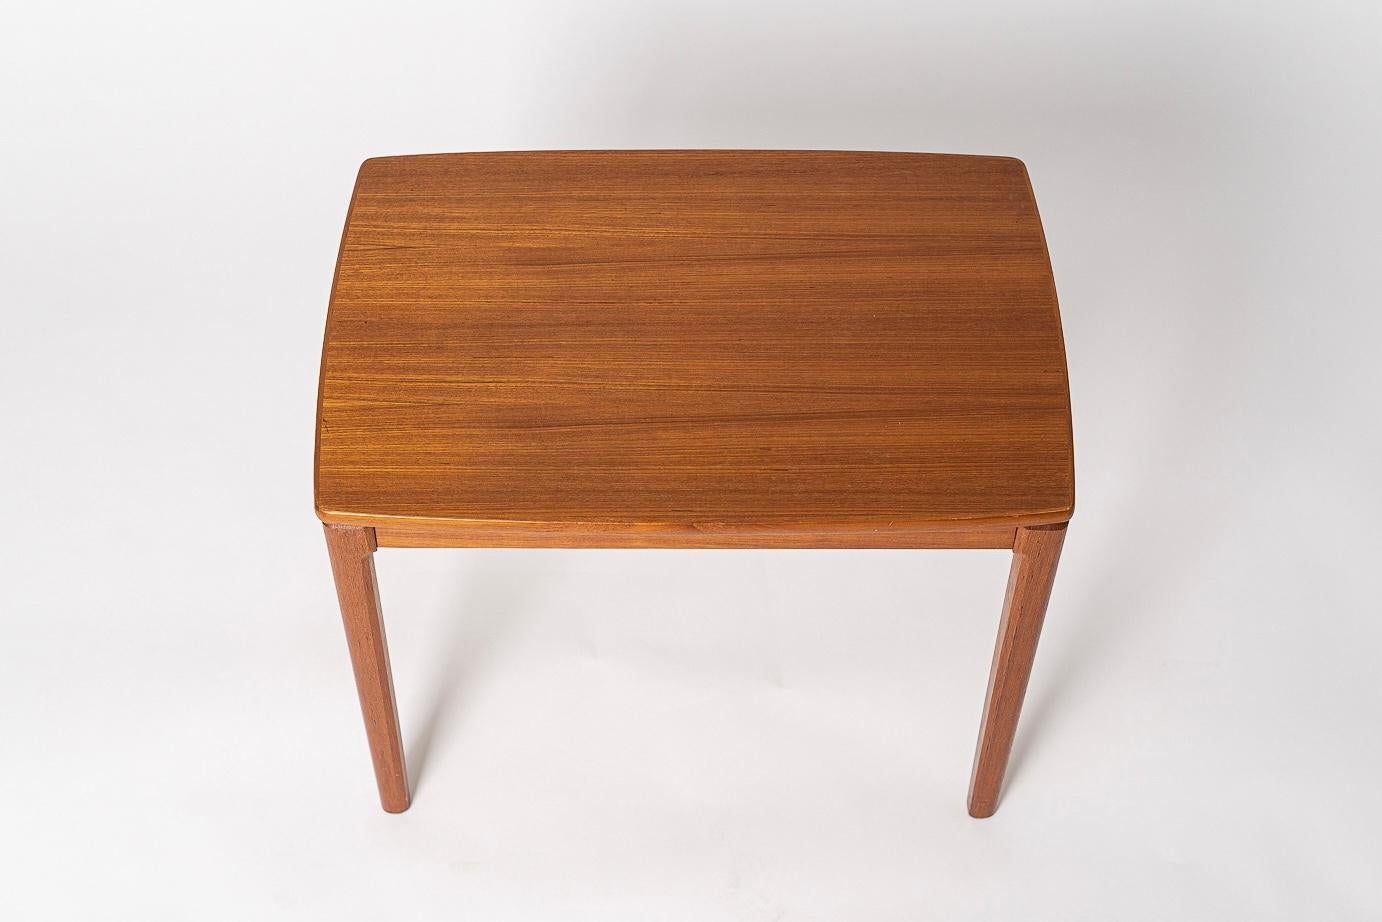 20th Century Mid Century Teak Wood Side Table in by Albert Larsson, 1968 For Sale